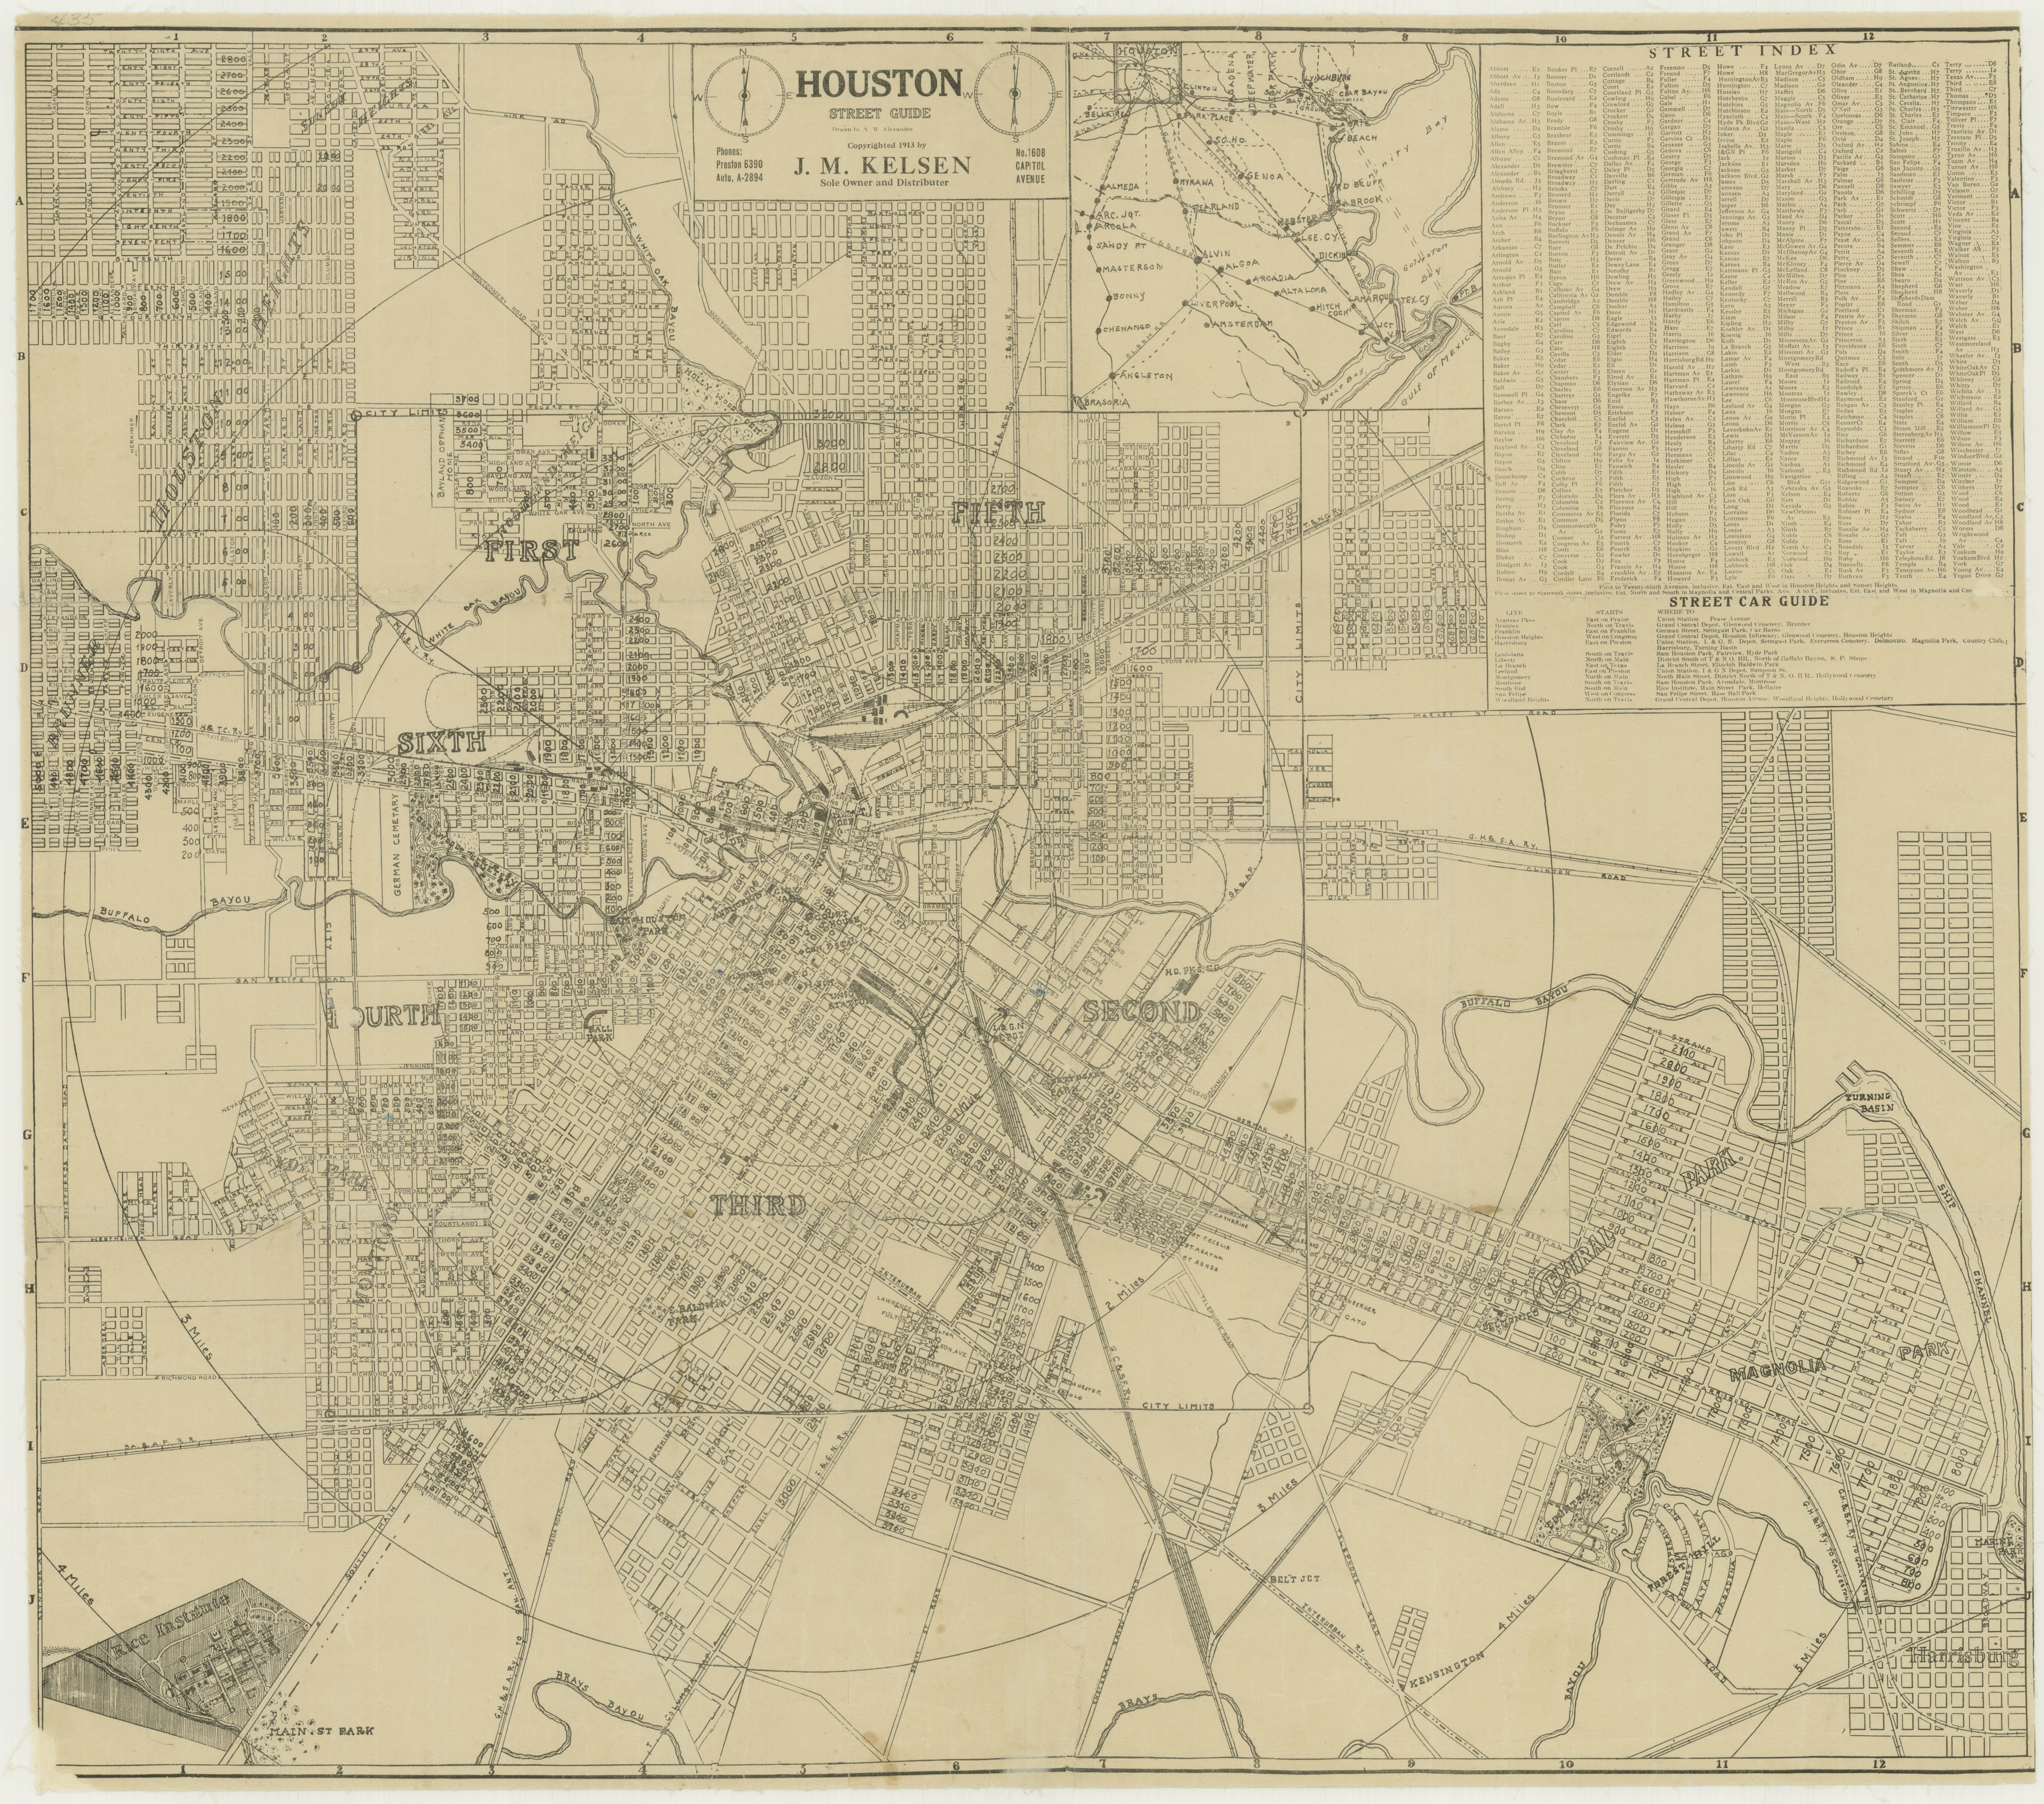 Section of a map of Houston from 1913, showing the location of the station and yards, the eventual ballpark site. (Select the image to view the full map.)